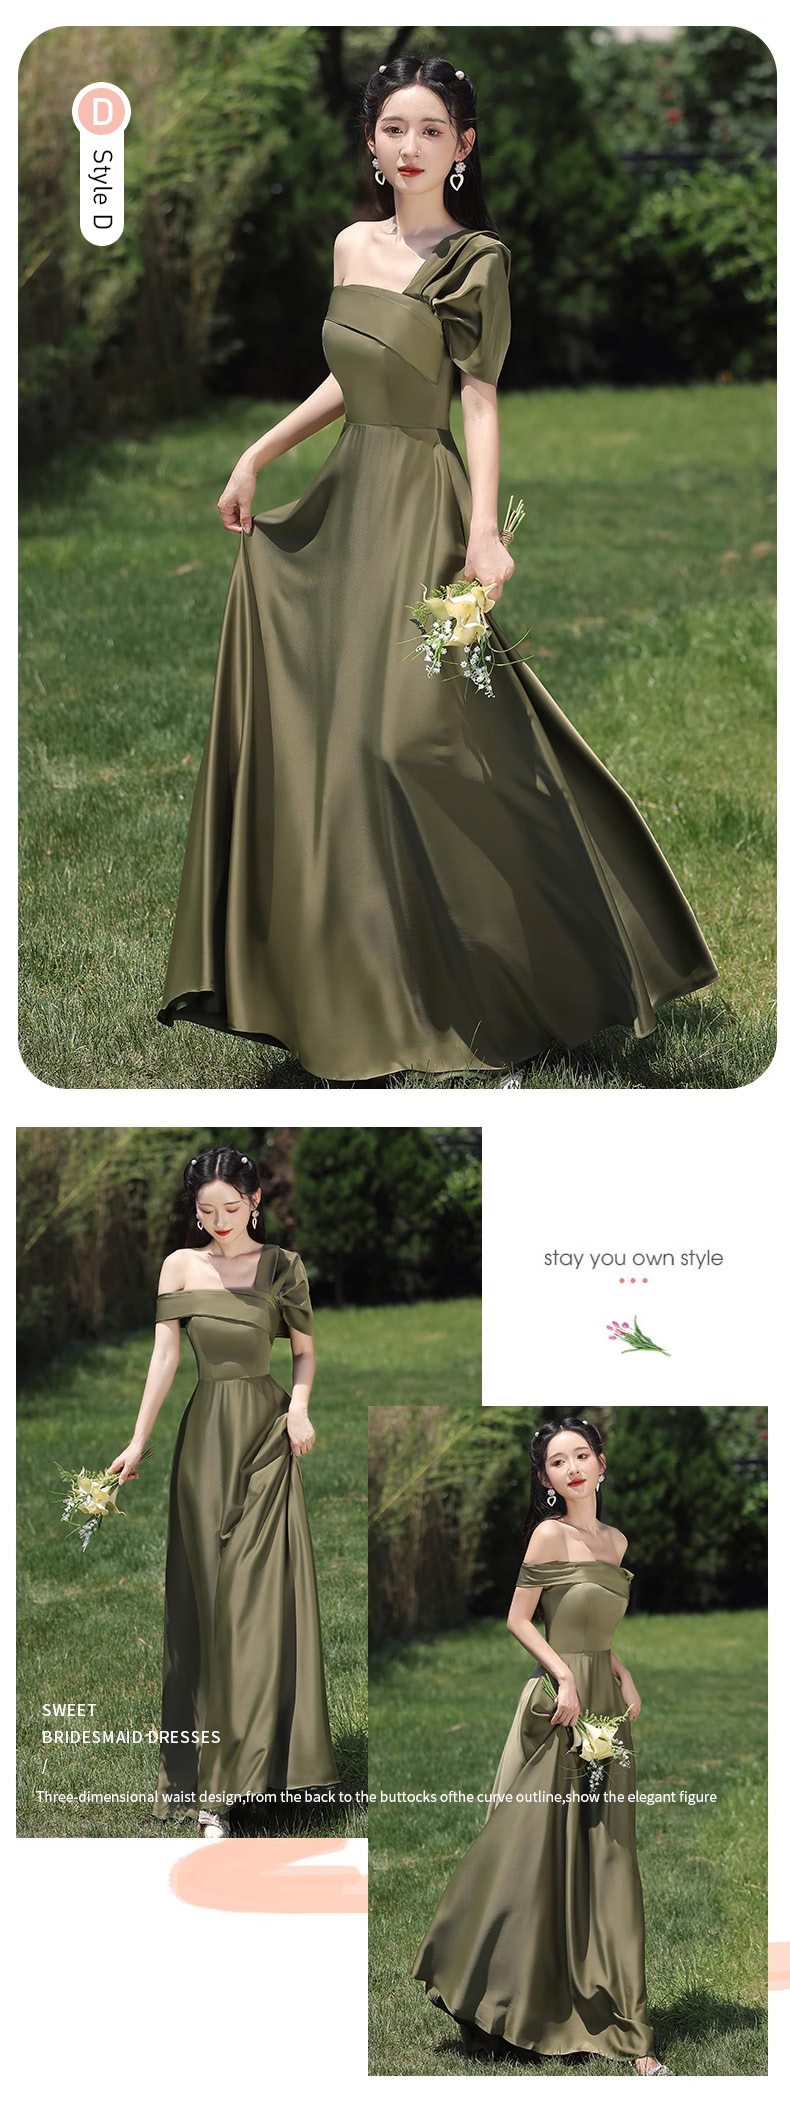 Simple-Green-Satin-Bridesmaid-Dress-Cocktail-Prom-Evening-Gowns20